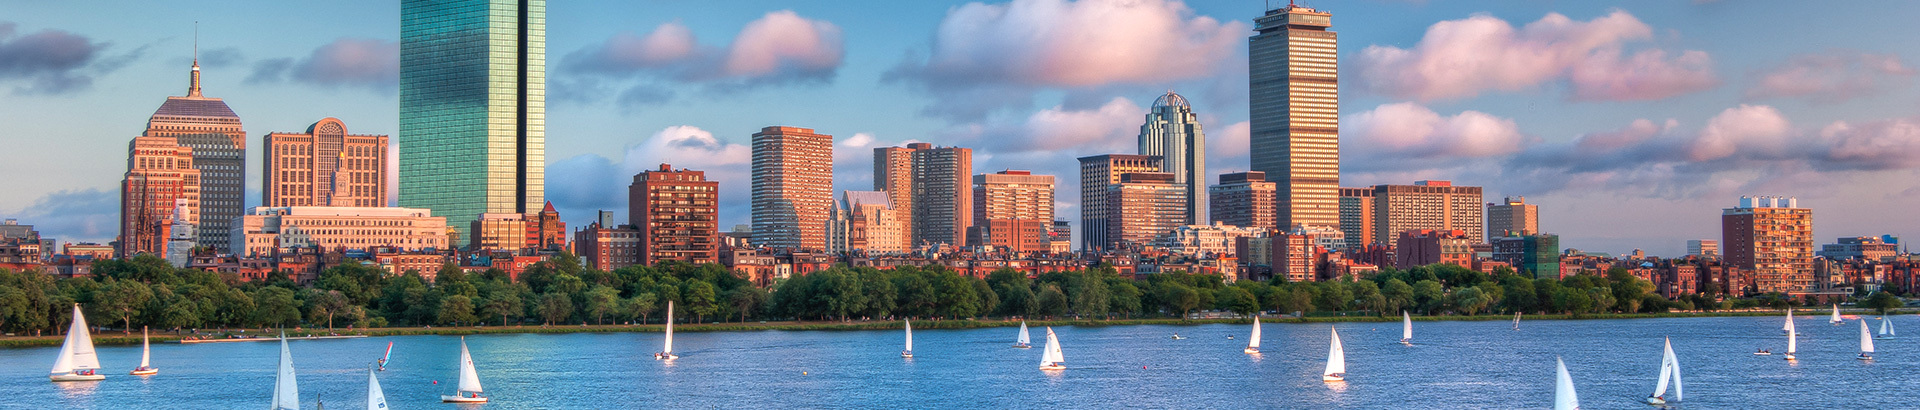 The City of Boston with the sun setting light on the buildings, and sailboats in the water